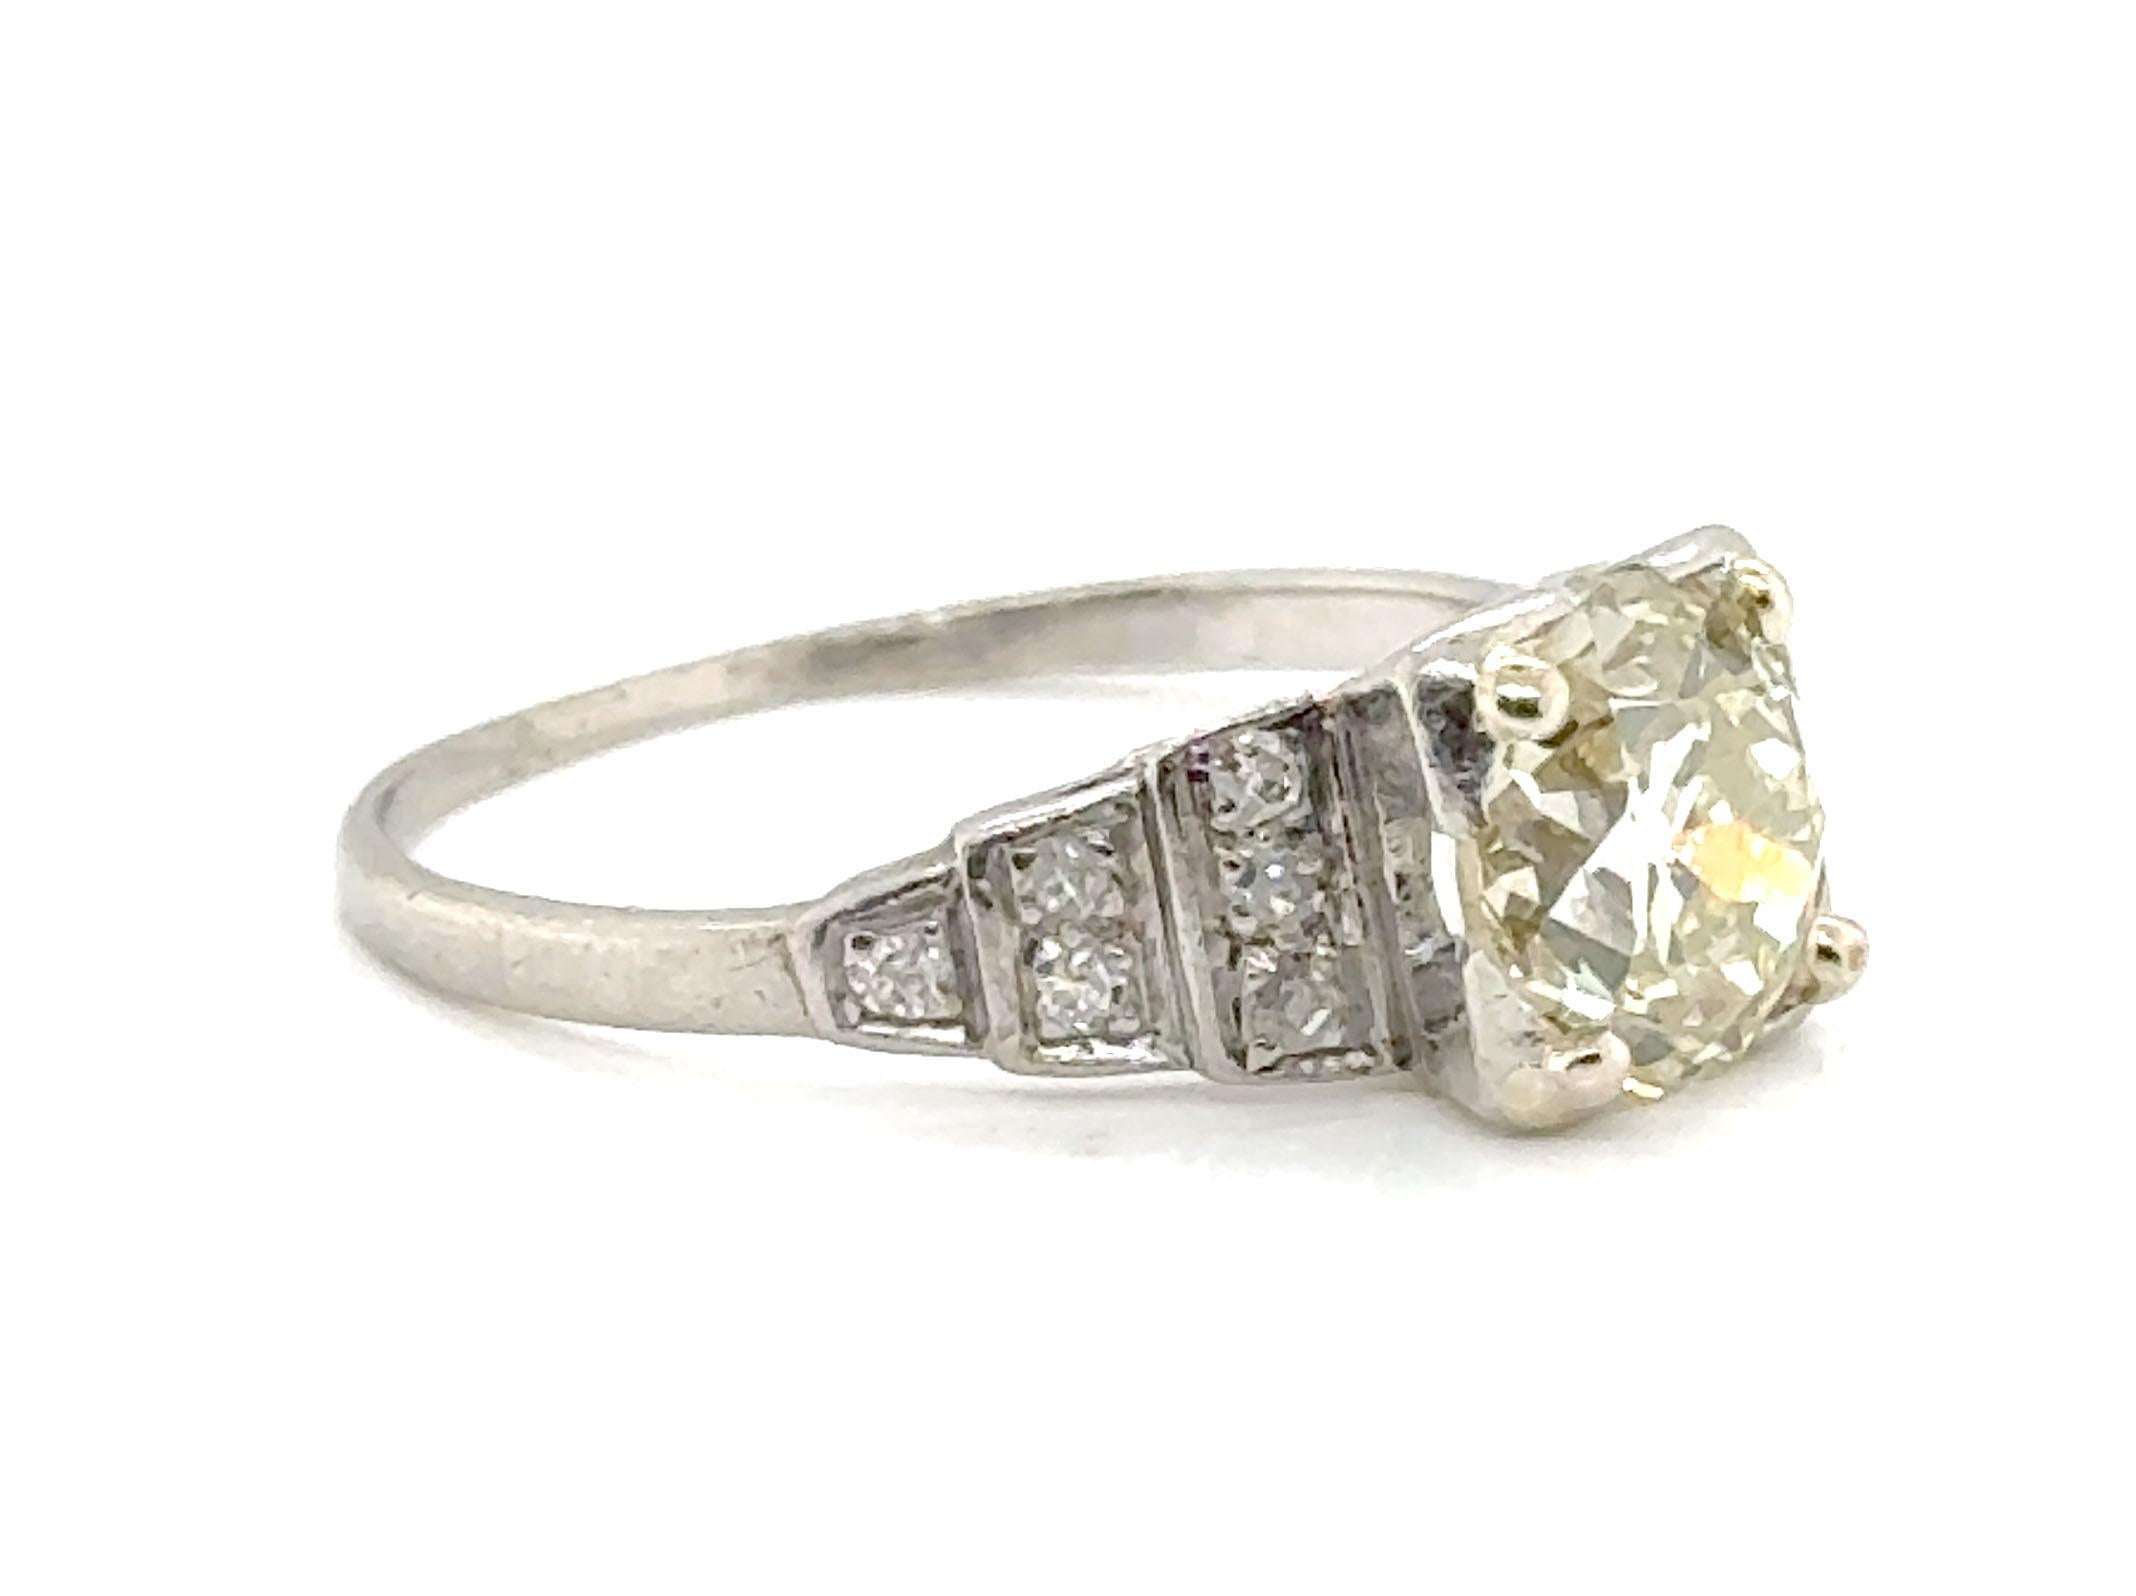 Genuine Original Antique from 1920's Art Deco 1.75ct Diamond Platinum Engagement Ring



Featuring a Magnificent Genuine Old European Cut Natural Mined Diamond Center Over 1.50ct

12 Antique Single Cut Diamonds Accent the Center Perfectly 

100%